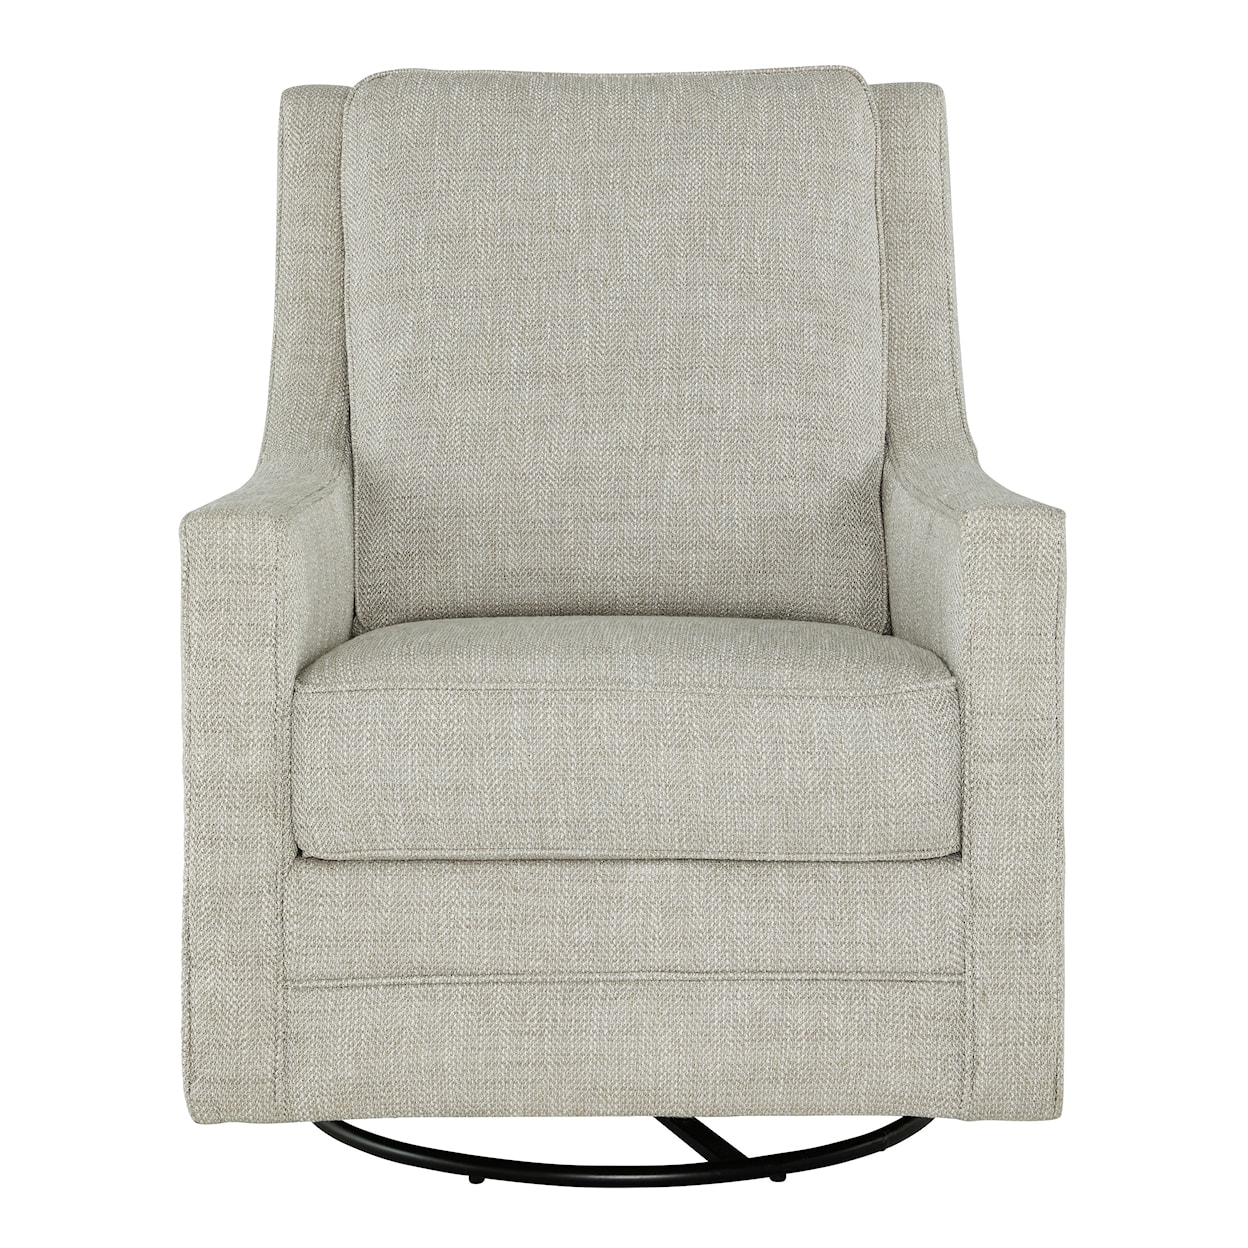 Michael Alan Select Kambria Swivel Glider Accent Chair